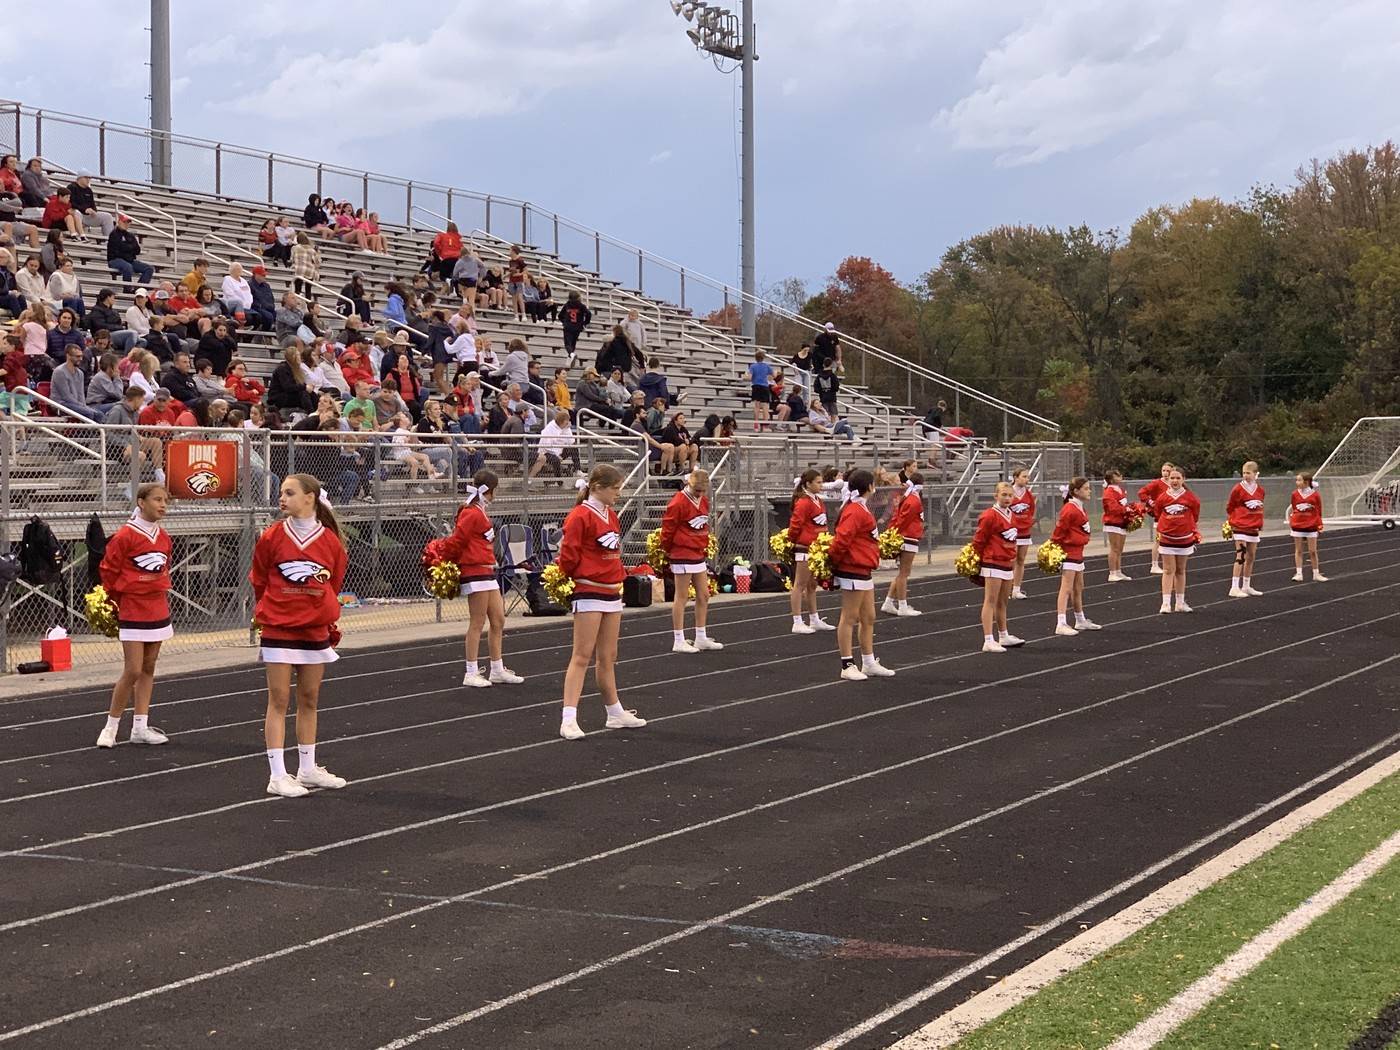 7th Grade Cheer in Action